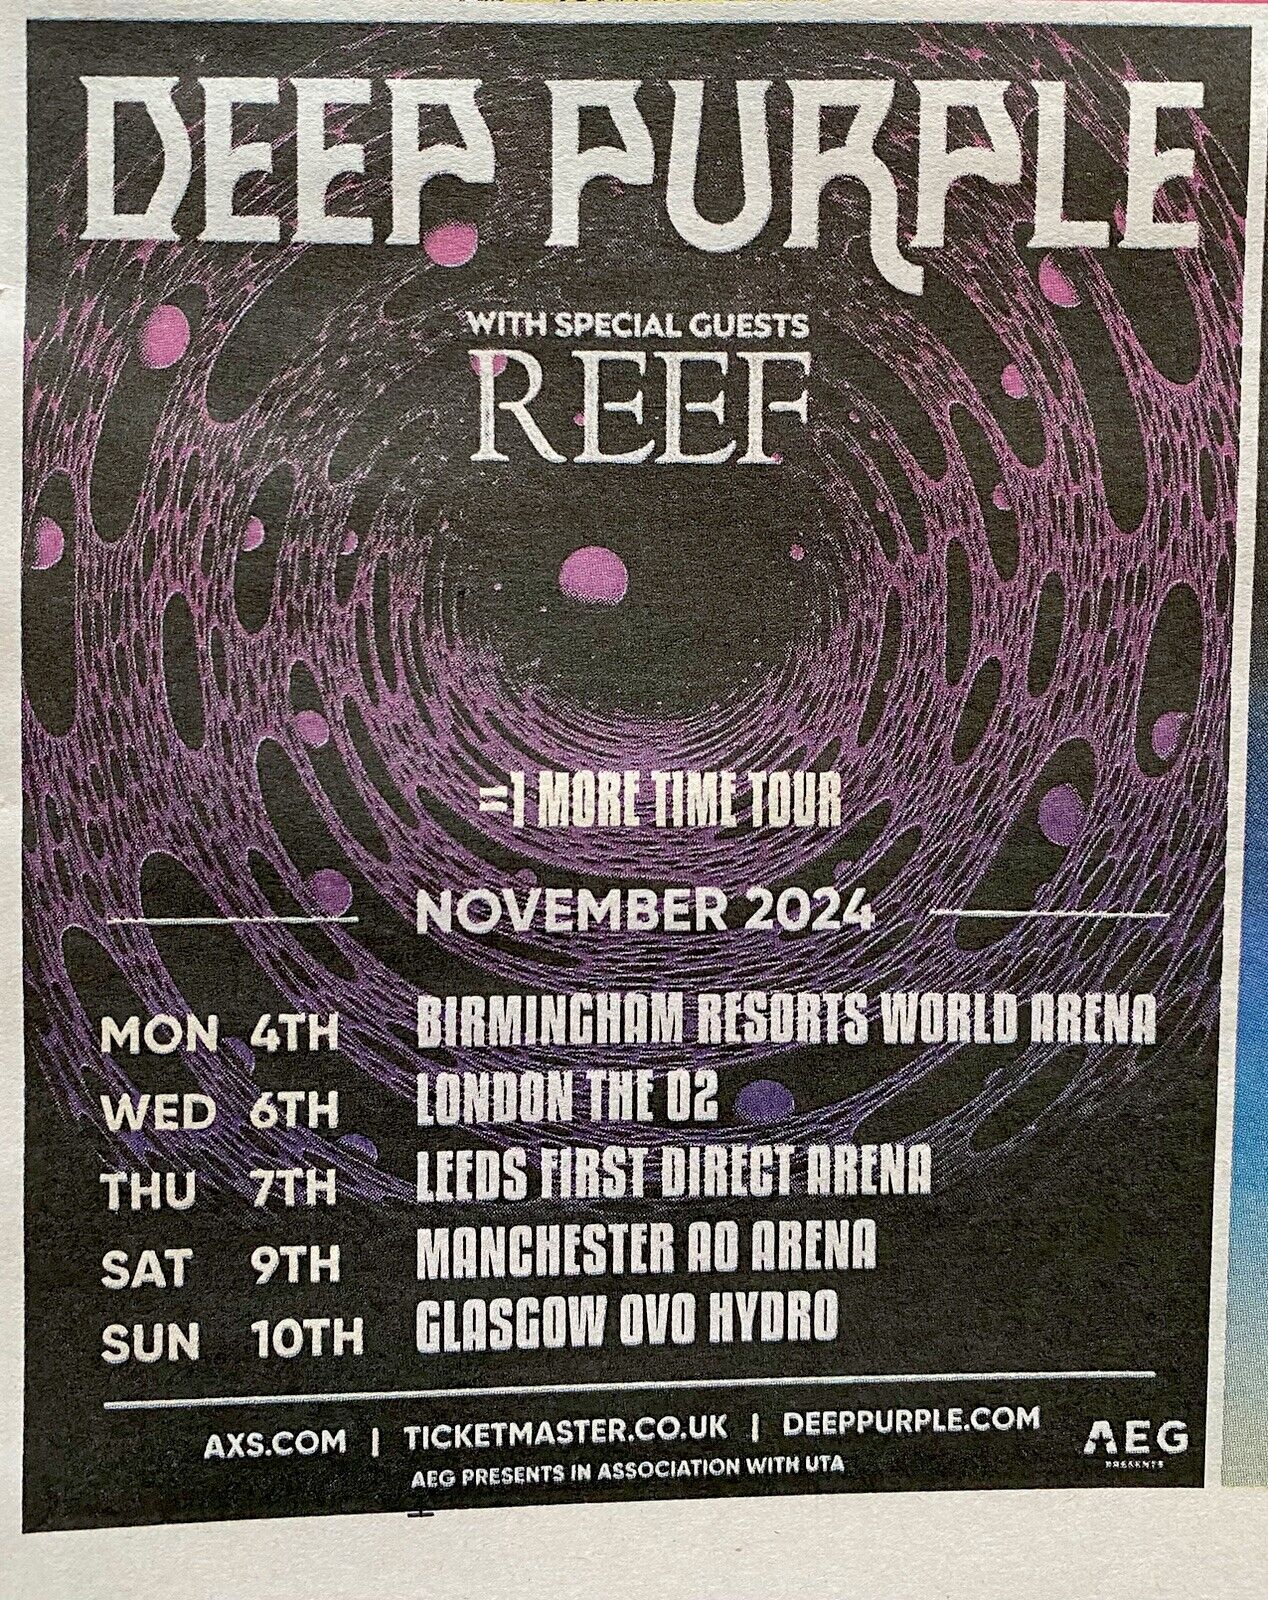 Deep Purple Tour Dates Ad 2024 Reef One More Time Newspaper Advert Clipping 7x5”